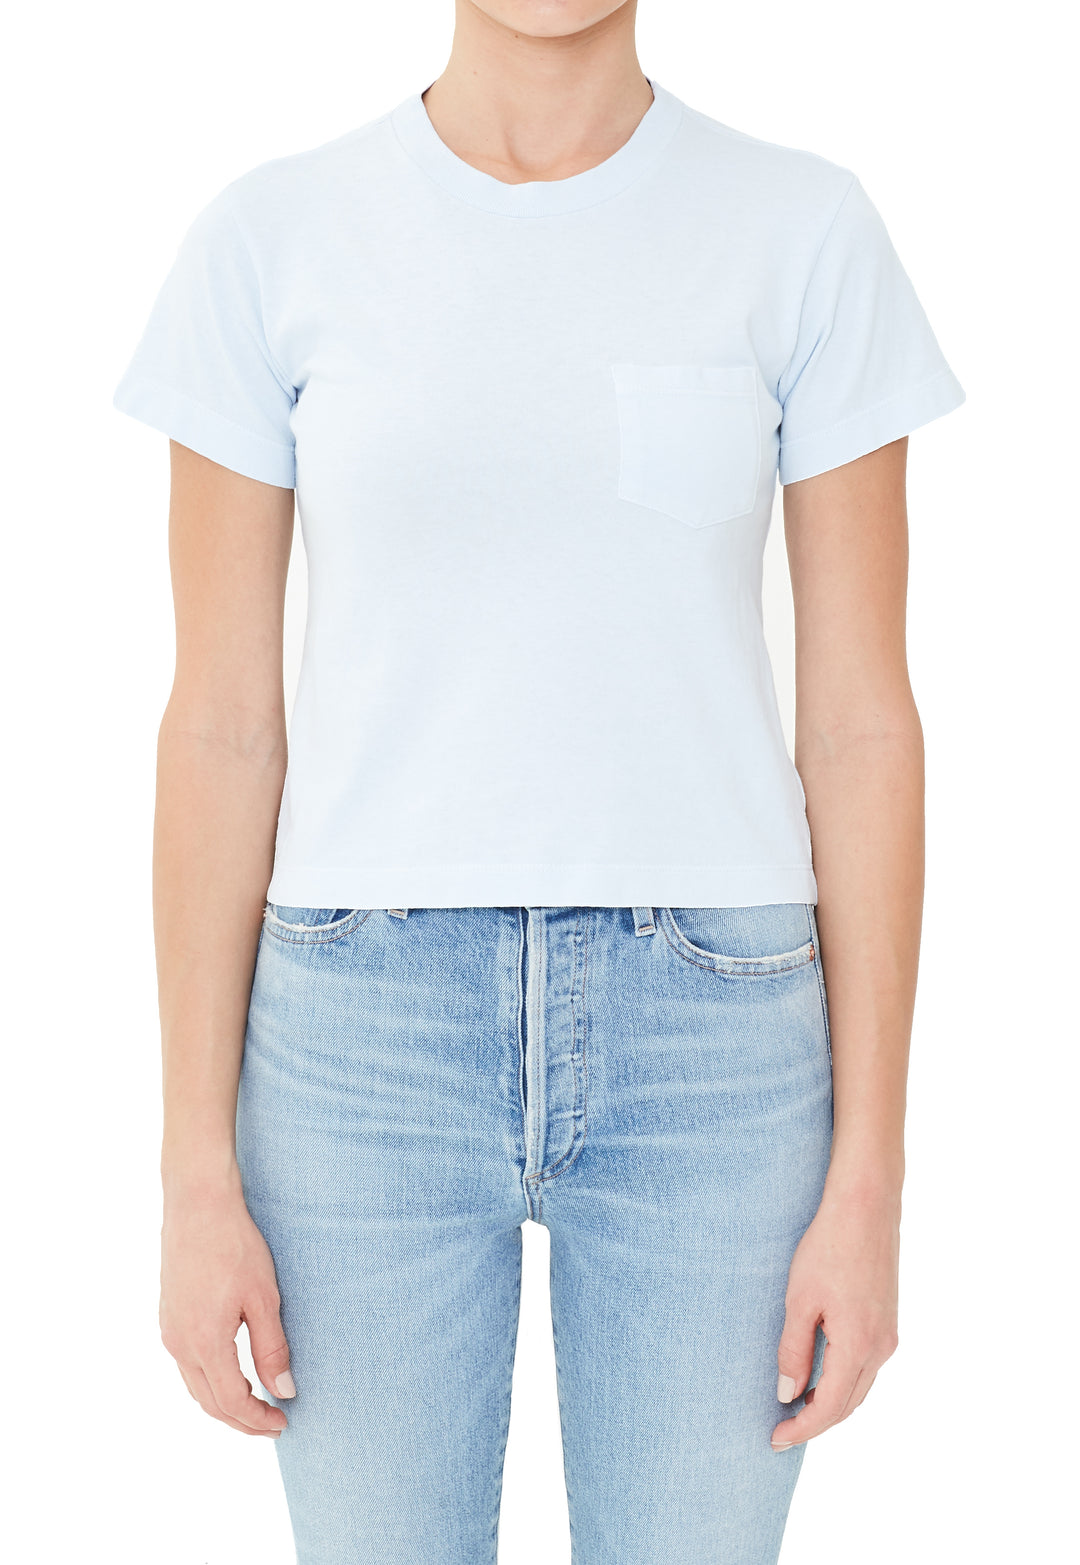 Citizens of Humanity- Grace Pocket Tee in Cloud